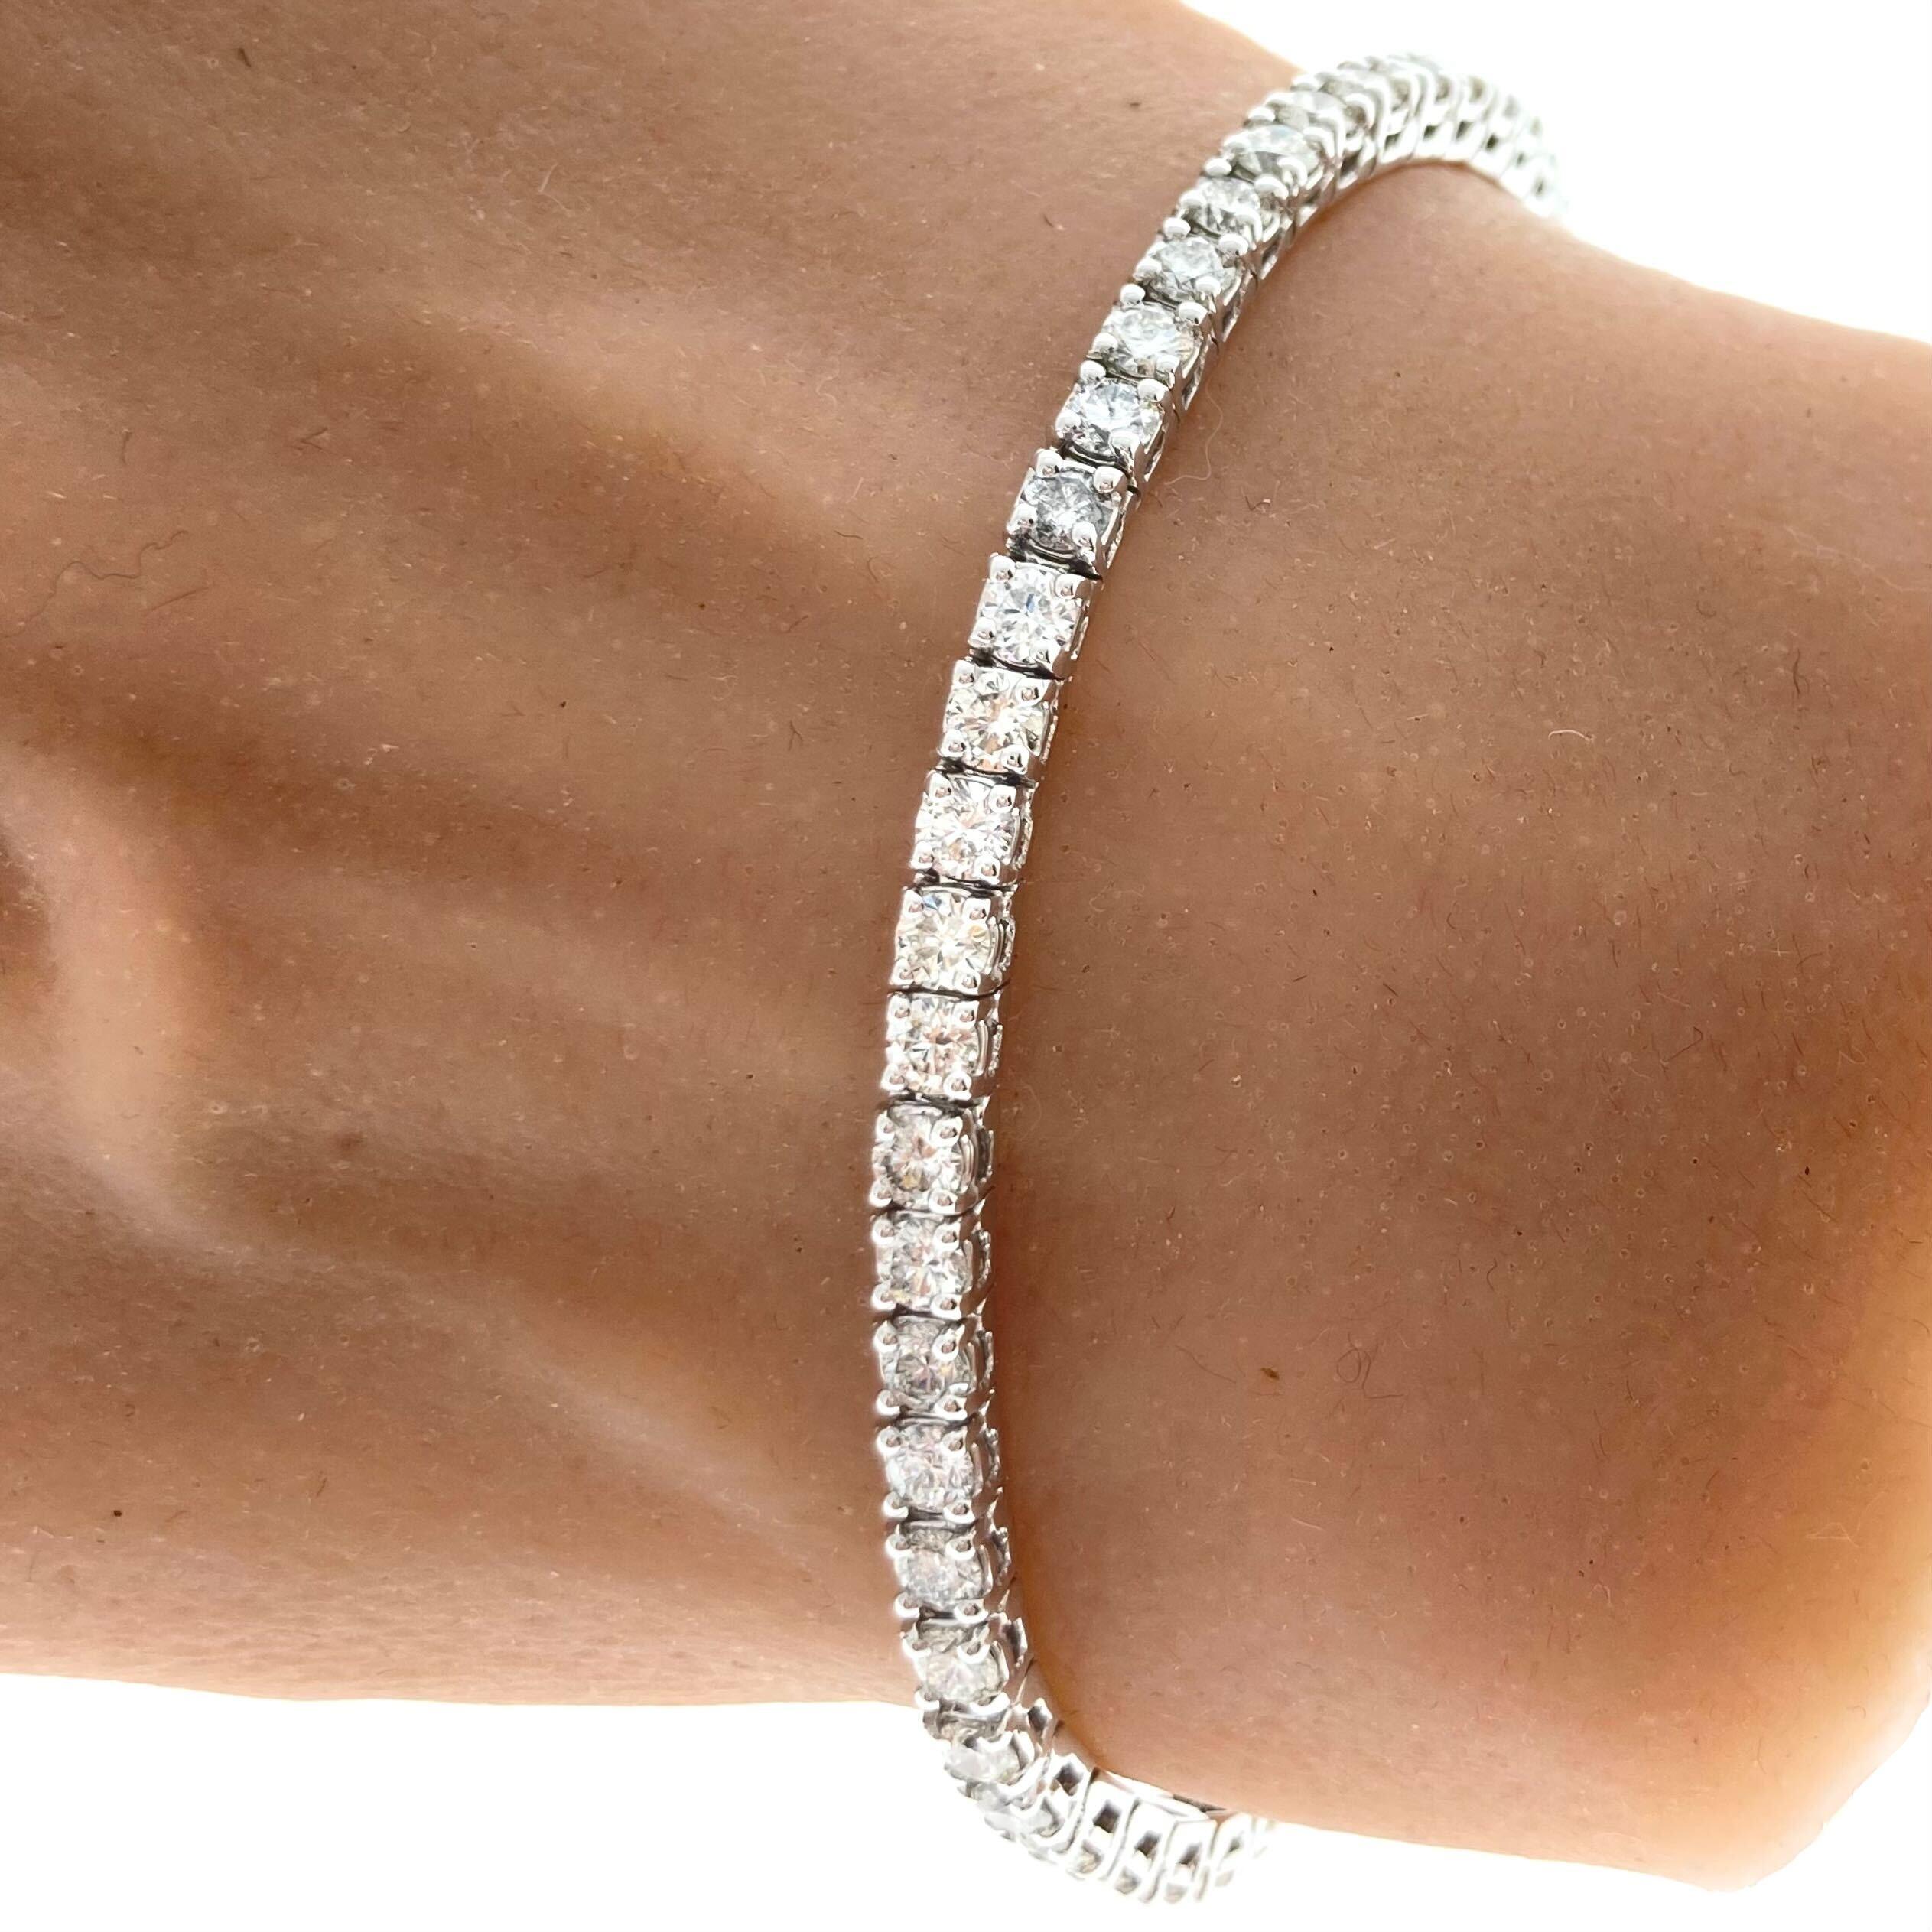 A 4-prong diamond bracelet featuring round-cut diamonds as the main stones with a total carat weight of 4.38 carats. The color of the diamonds is in the G-H range, indicating near-colorless to faint color. The clarity is graded as SI1-SI2, meaning